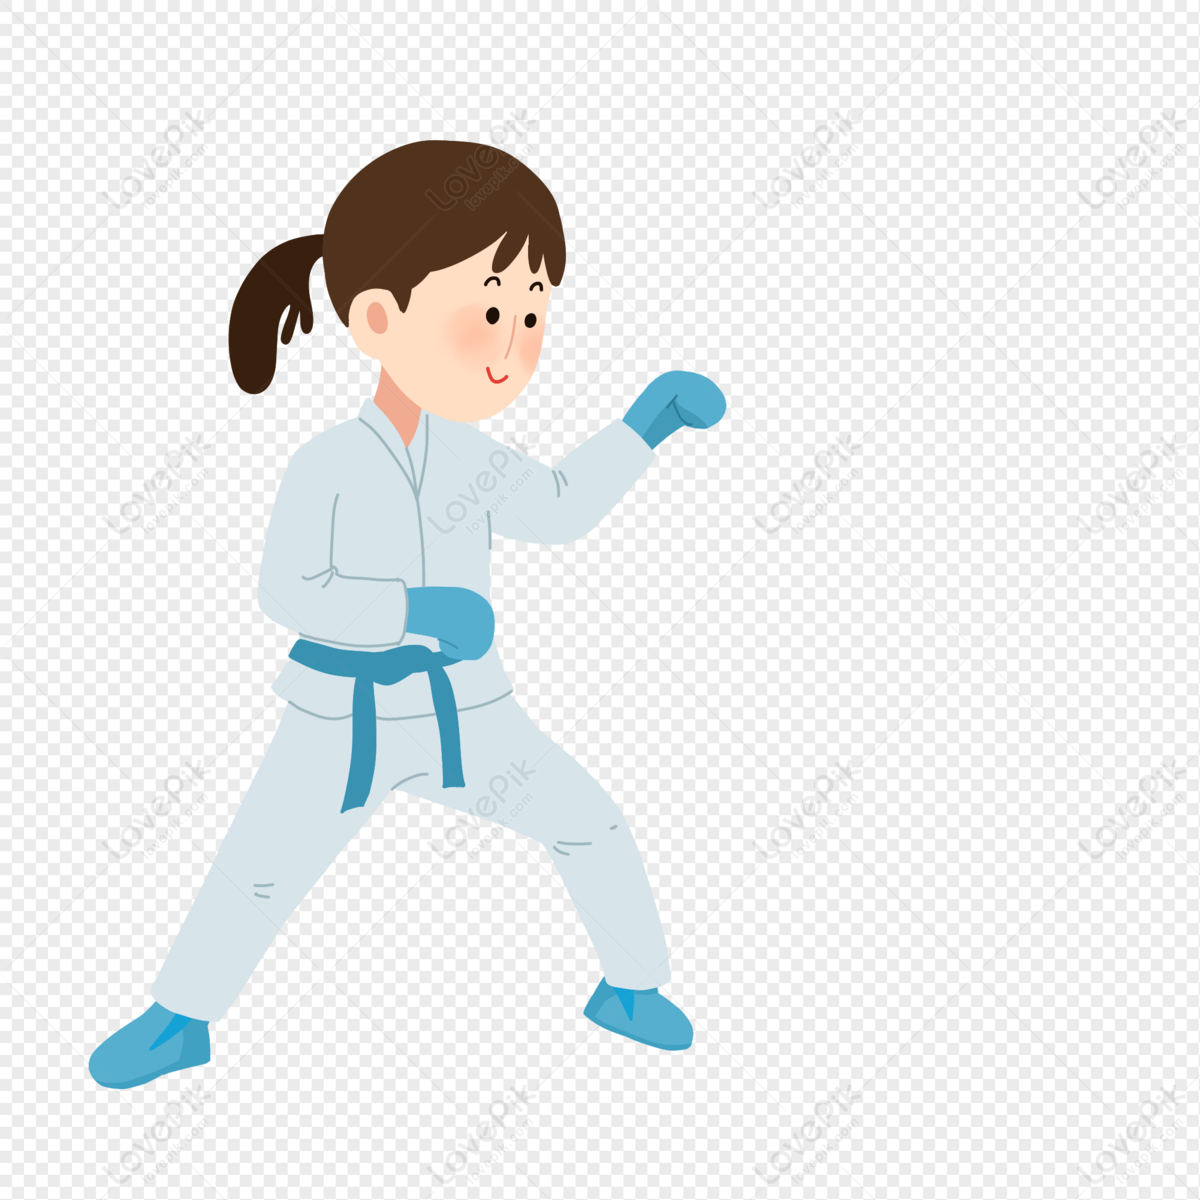 Karate Cartoon PNG Free Download And Clipart Image For Free Download -  Lovepik | 401379133